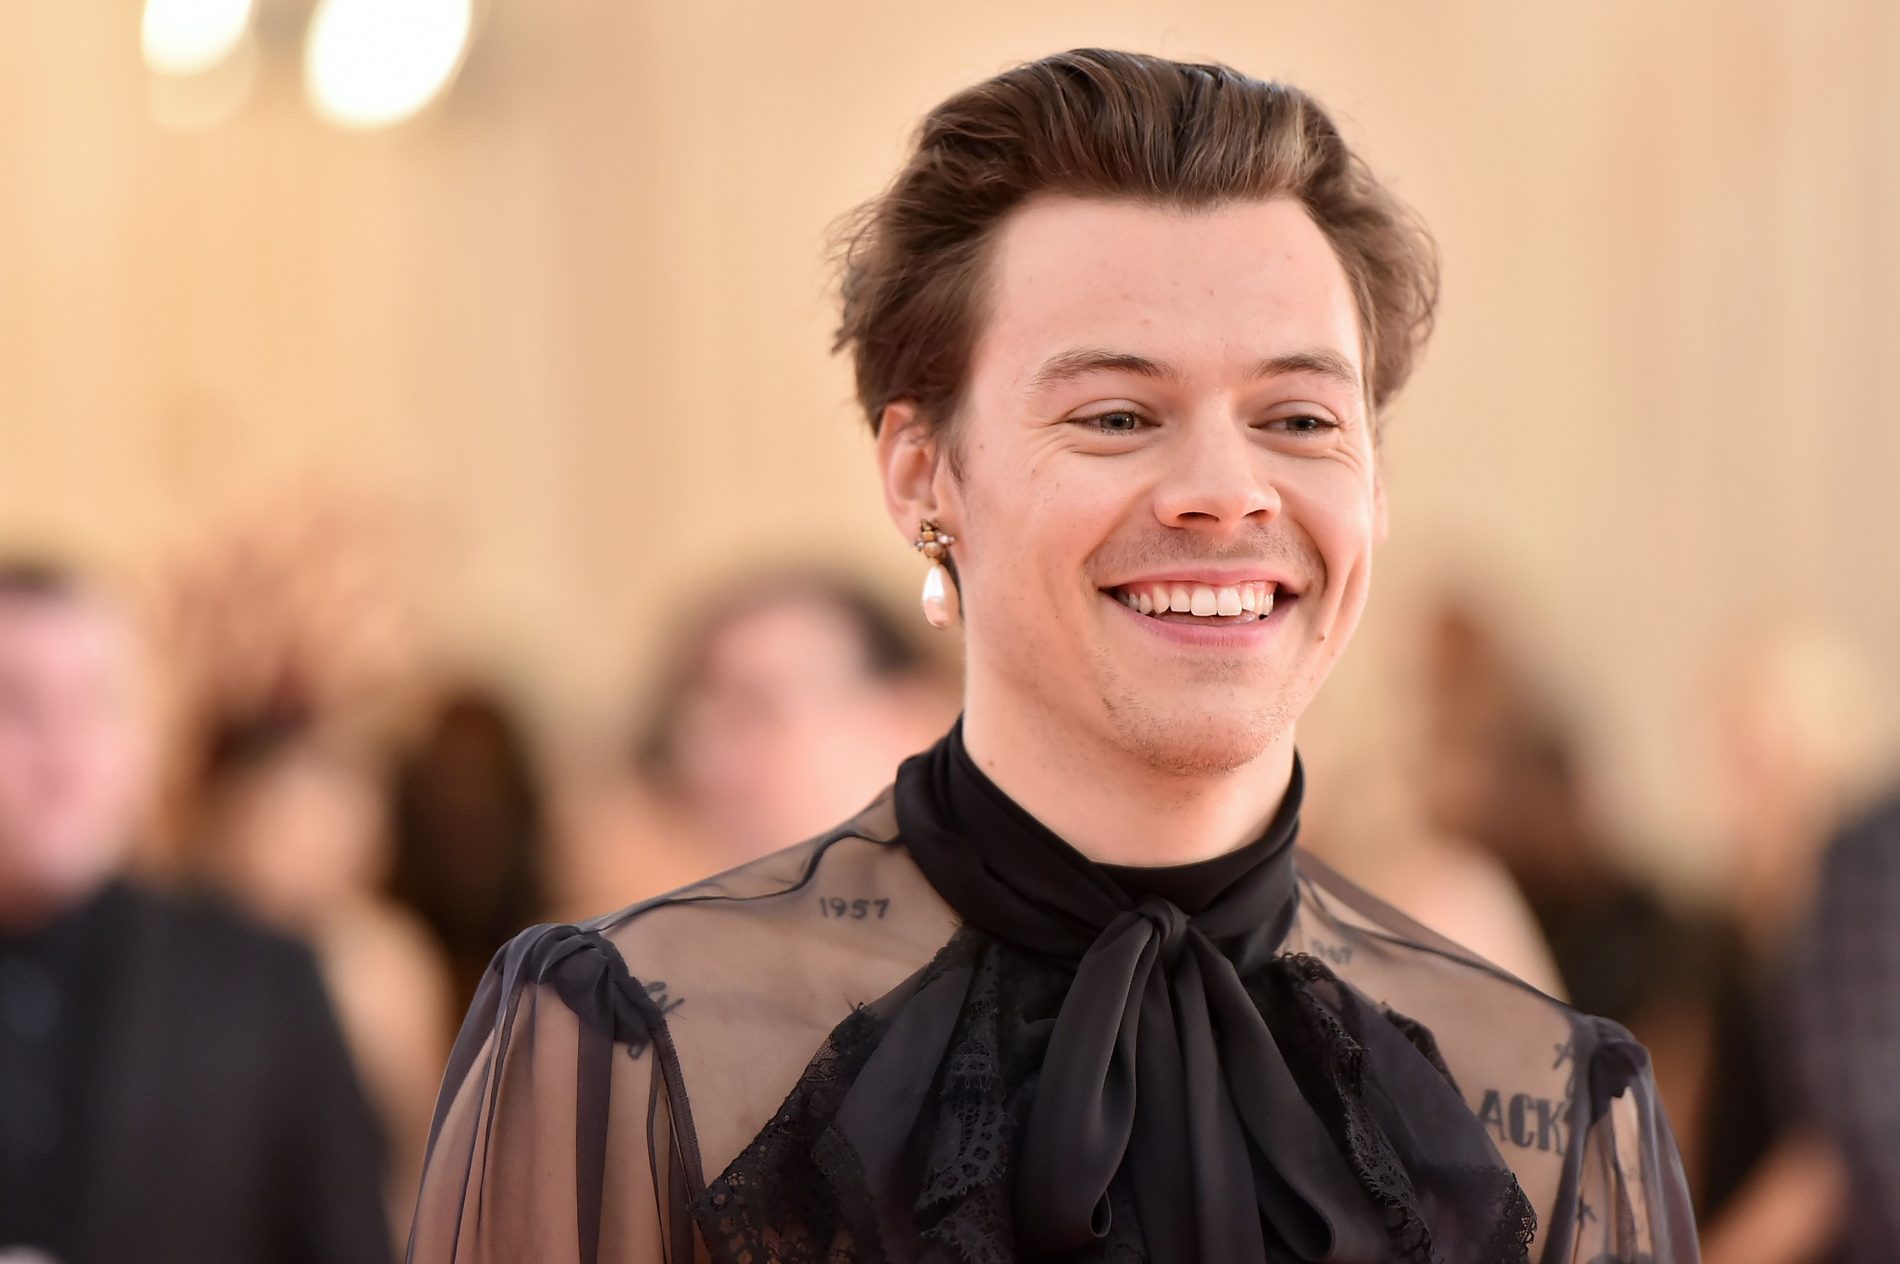 Fans are not impressed by Harry Styles’ “maybe I am, maybe I’m not” answers about being bisexual